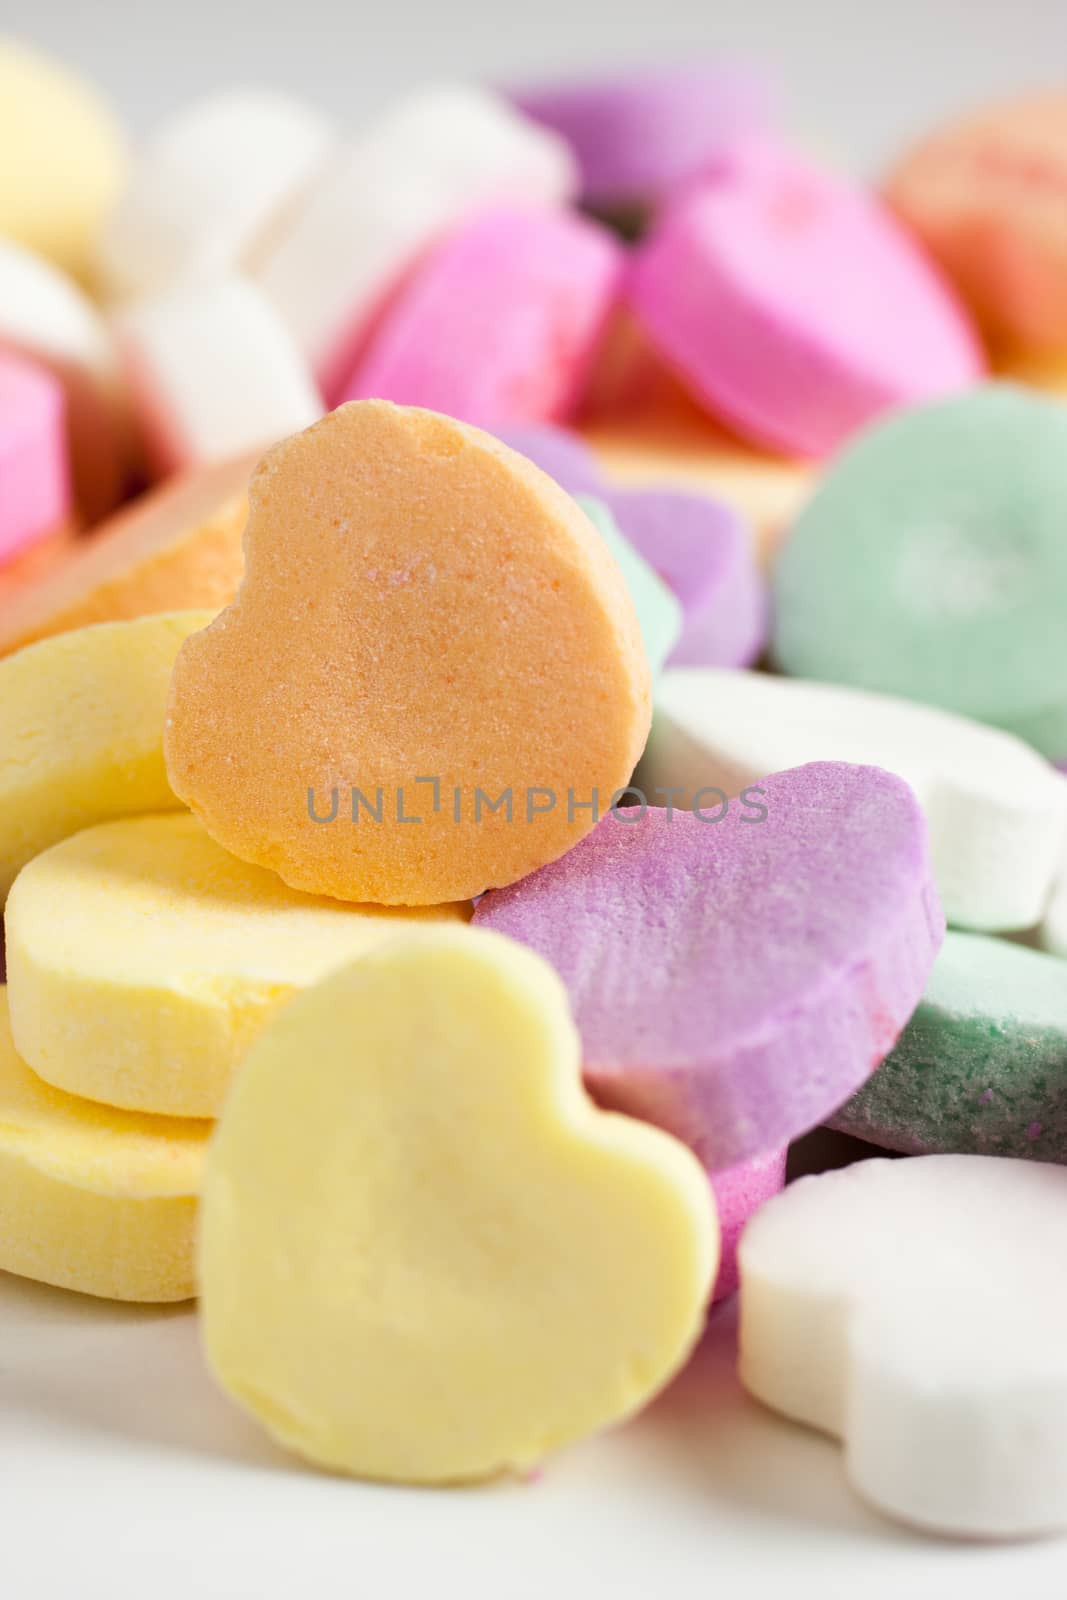 Candy Hearts by SouthernLightStudios